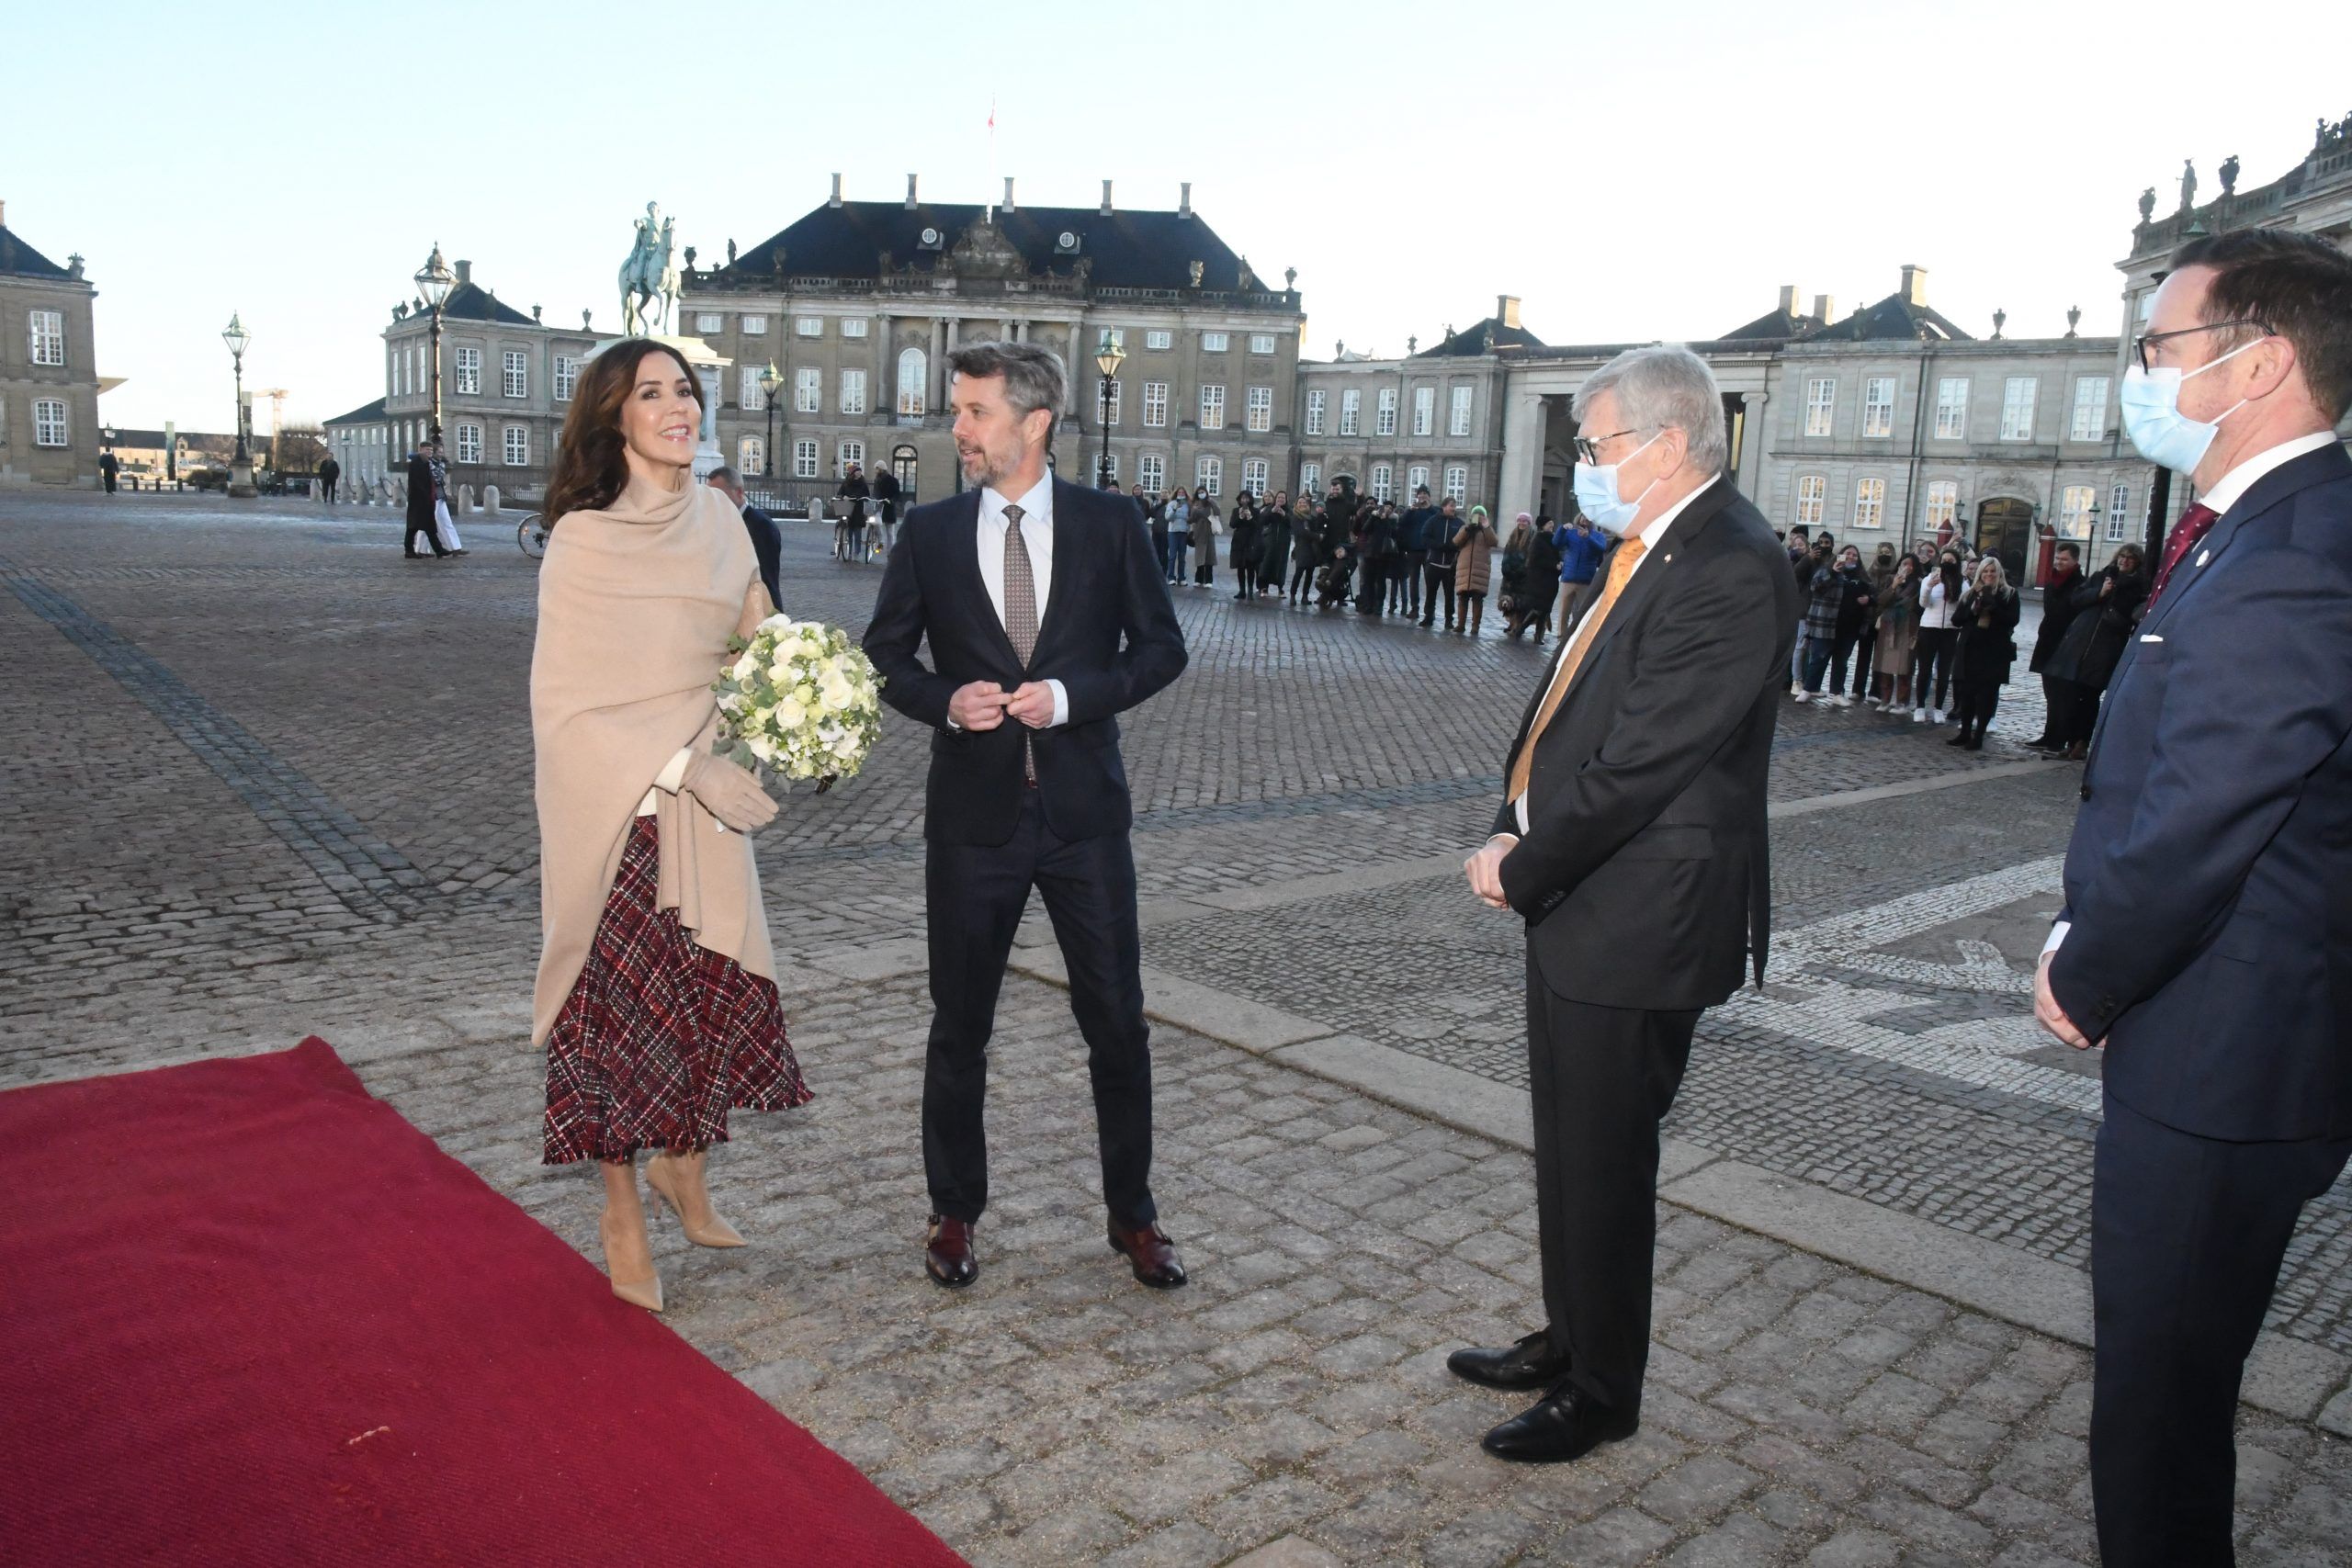 Local Round-Up: City institutions still determined to honour Crown Princess Mary’s 50th birthday